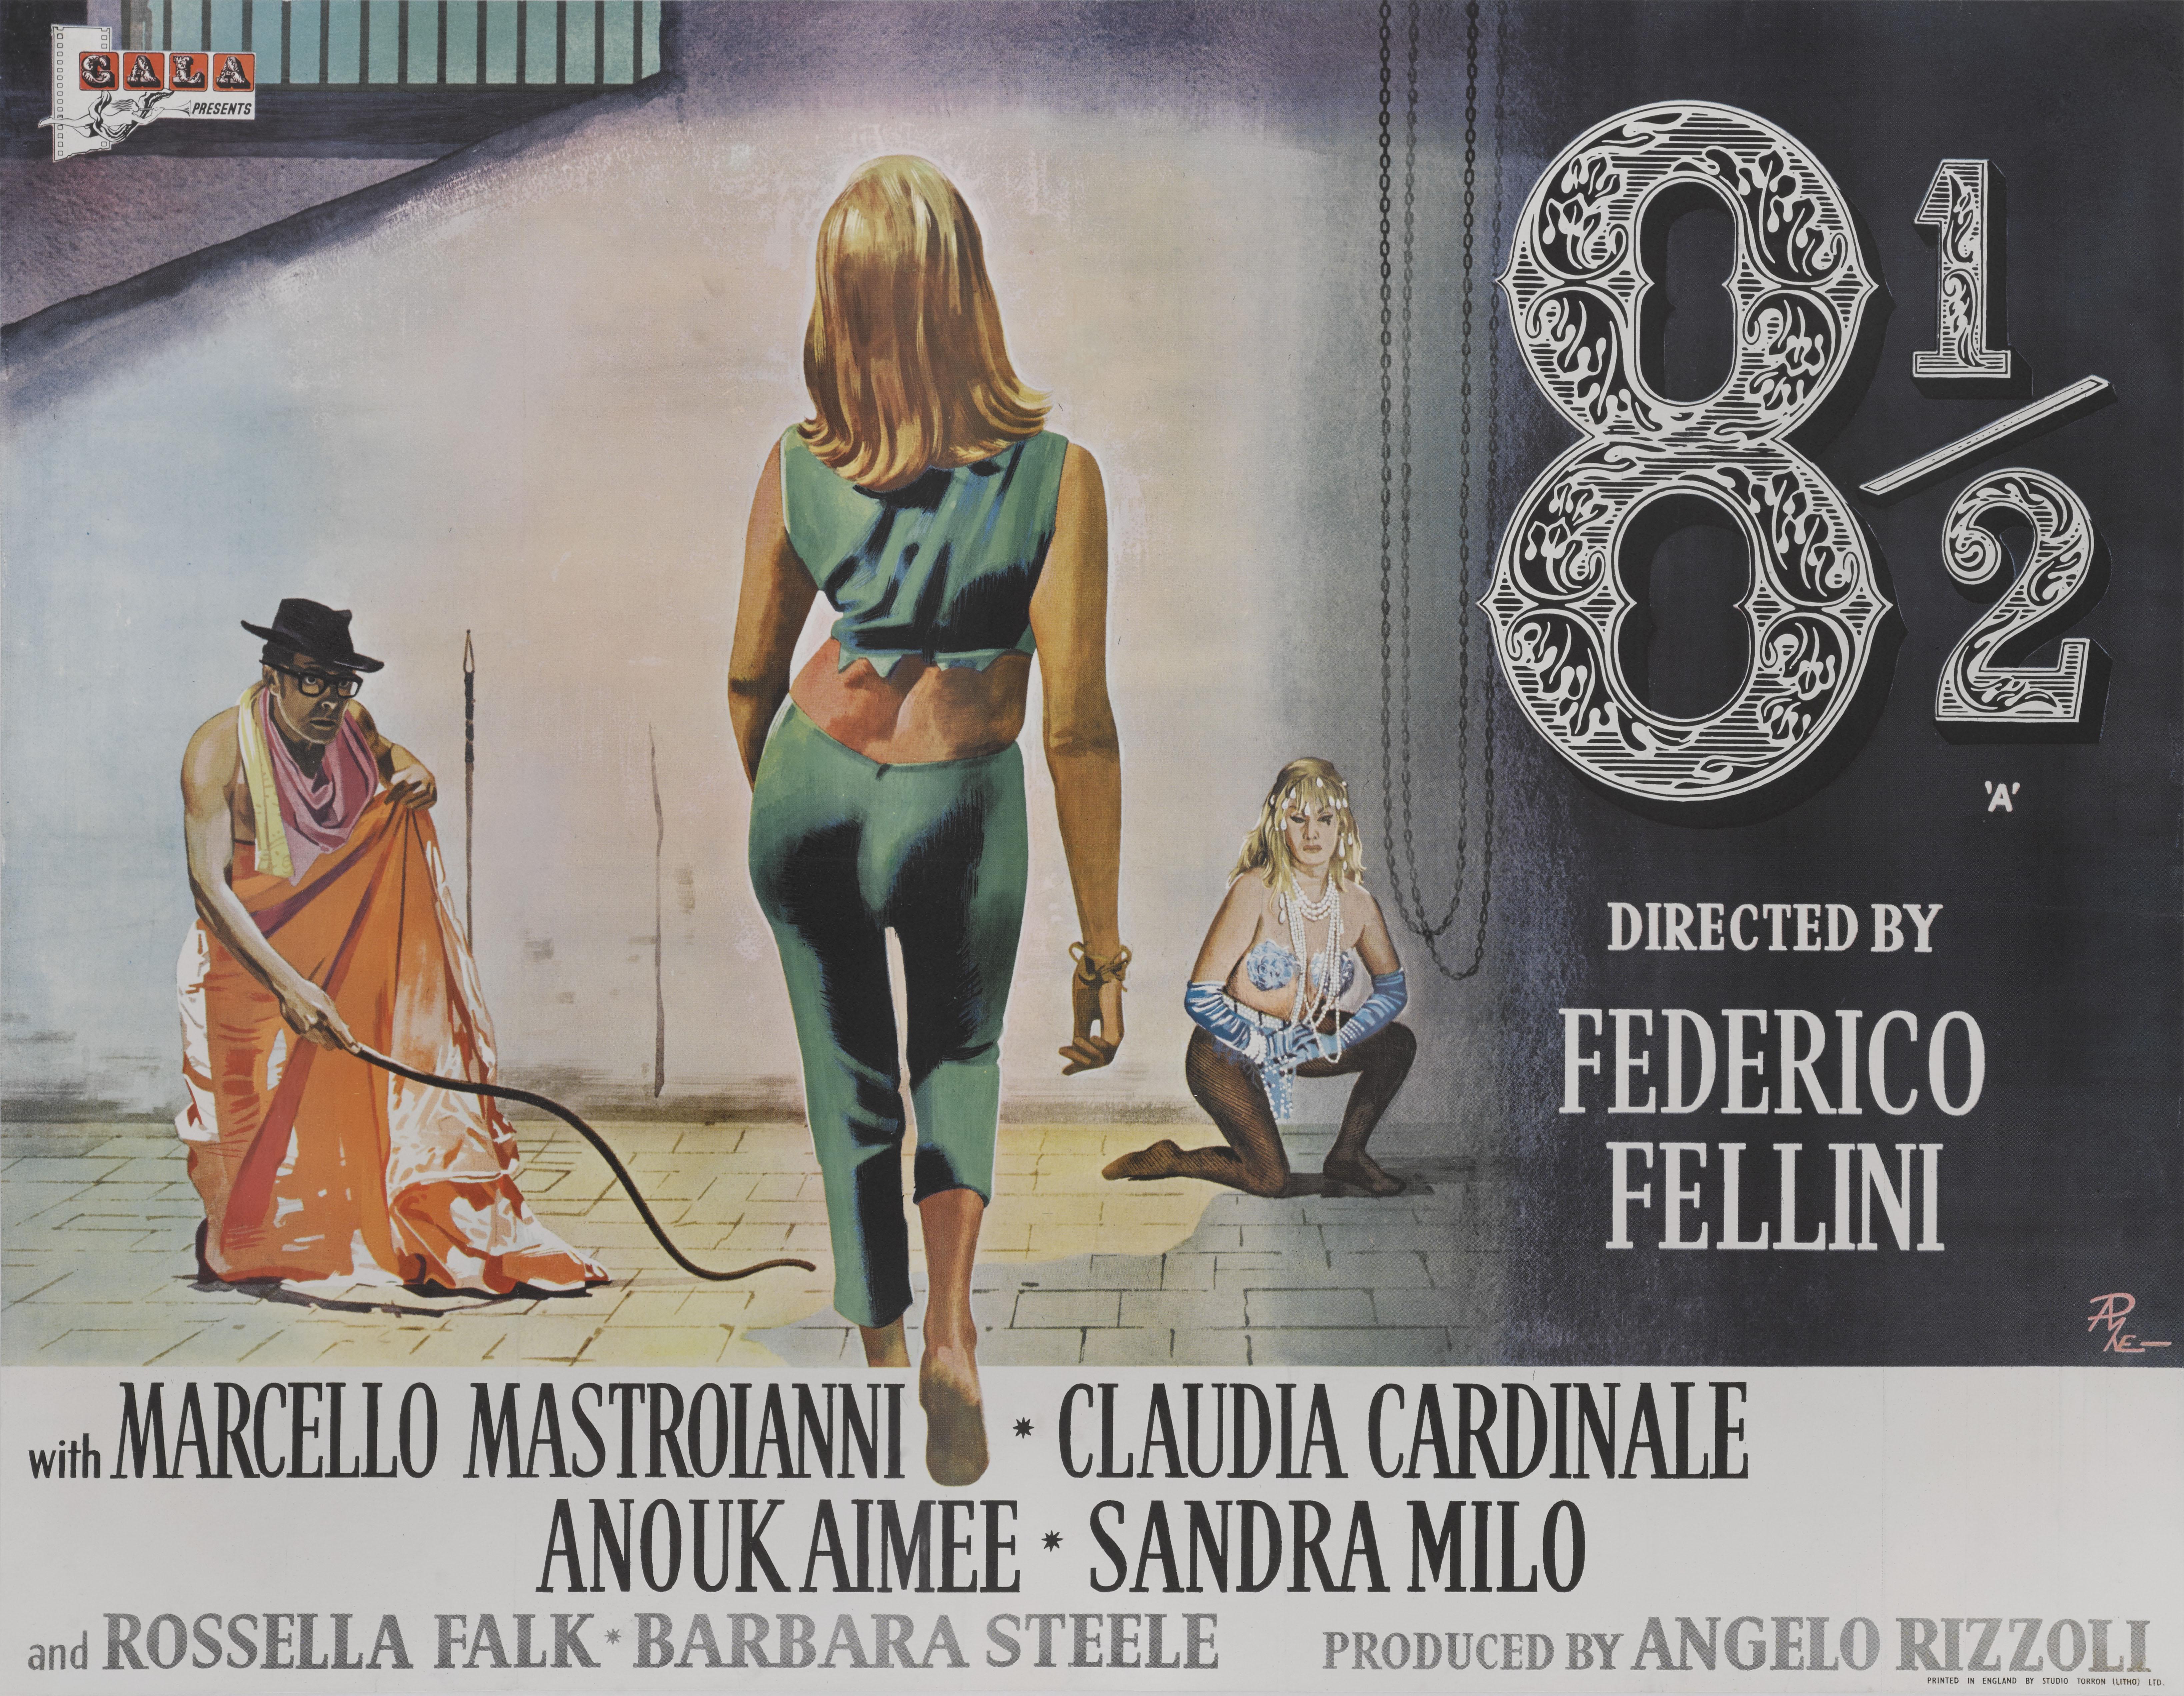 Exceptionally rare original British film poster for the 1963 drama director Federico Fellini he used the title 8 1/2 as this was his 8 1/2 film project. This film won Academy Awards for Best Foreign Language Film and Best Costume design. Fellini is